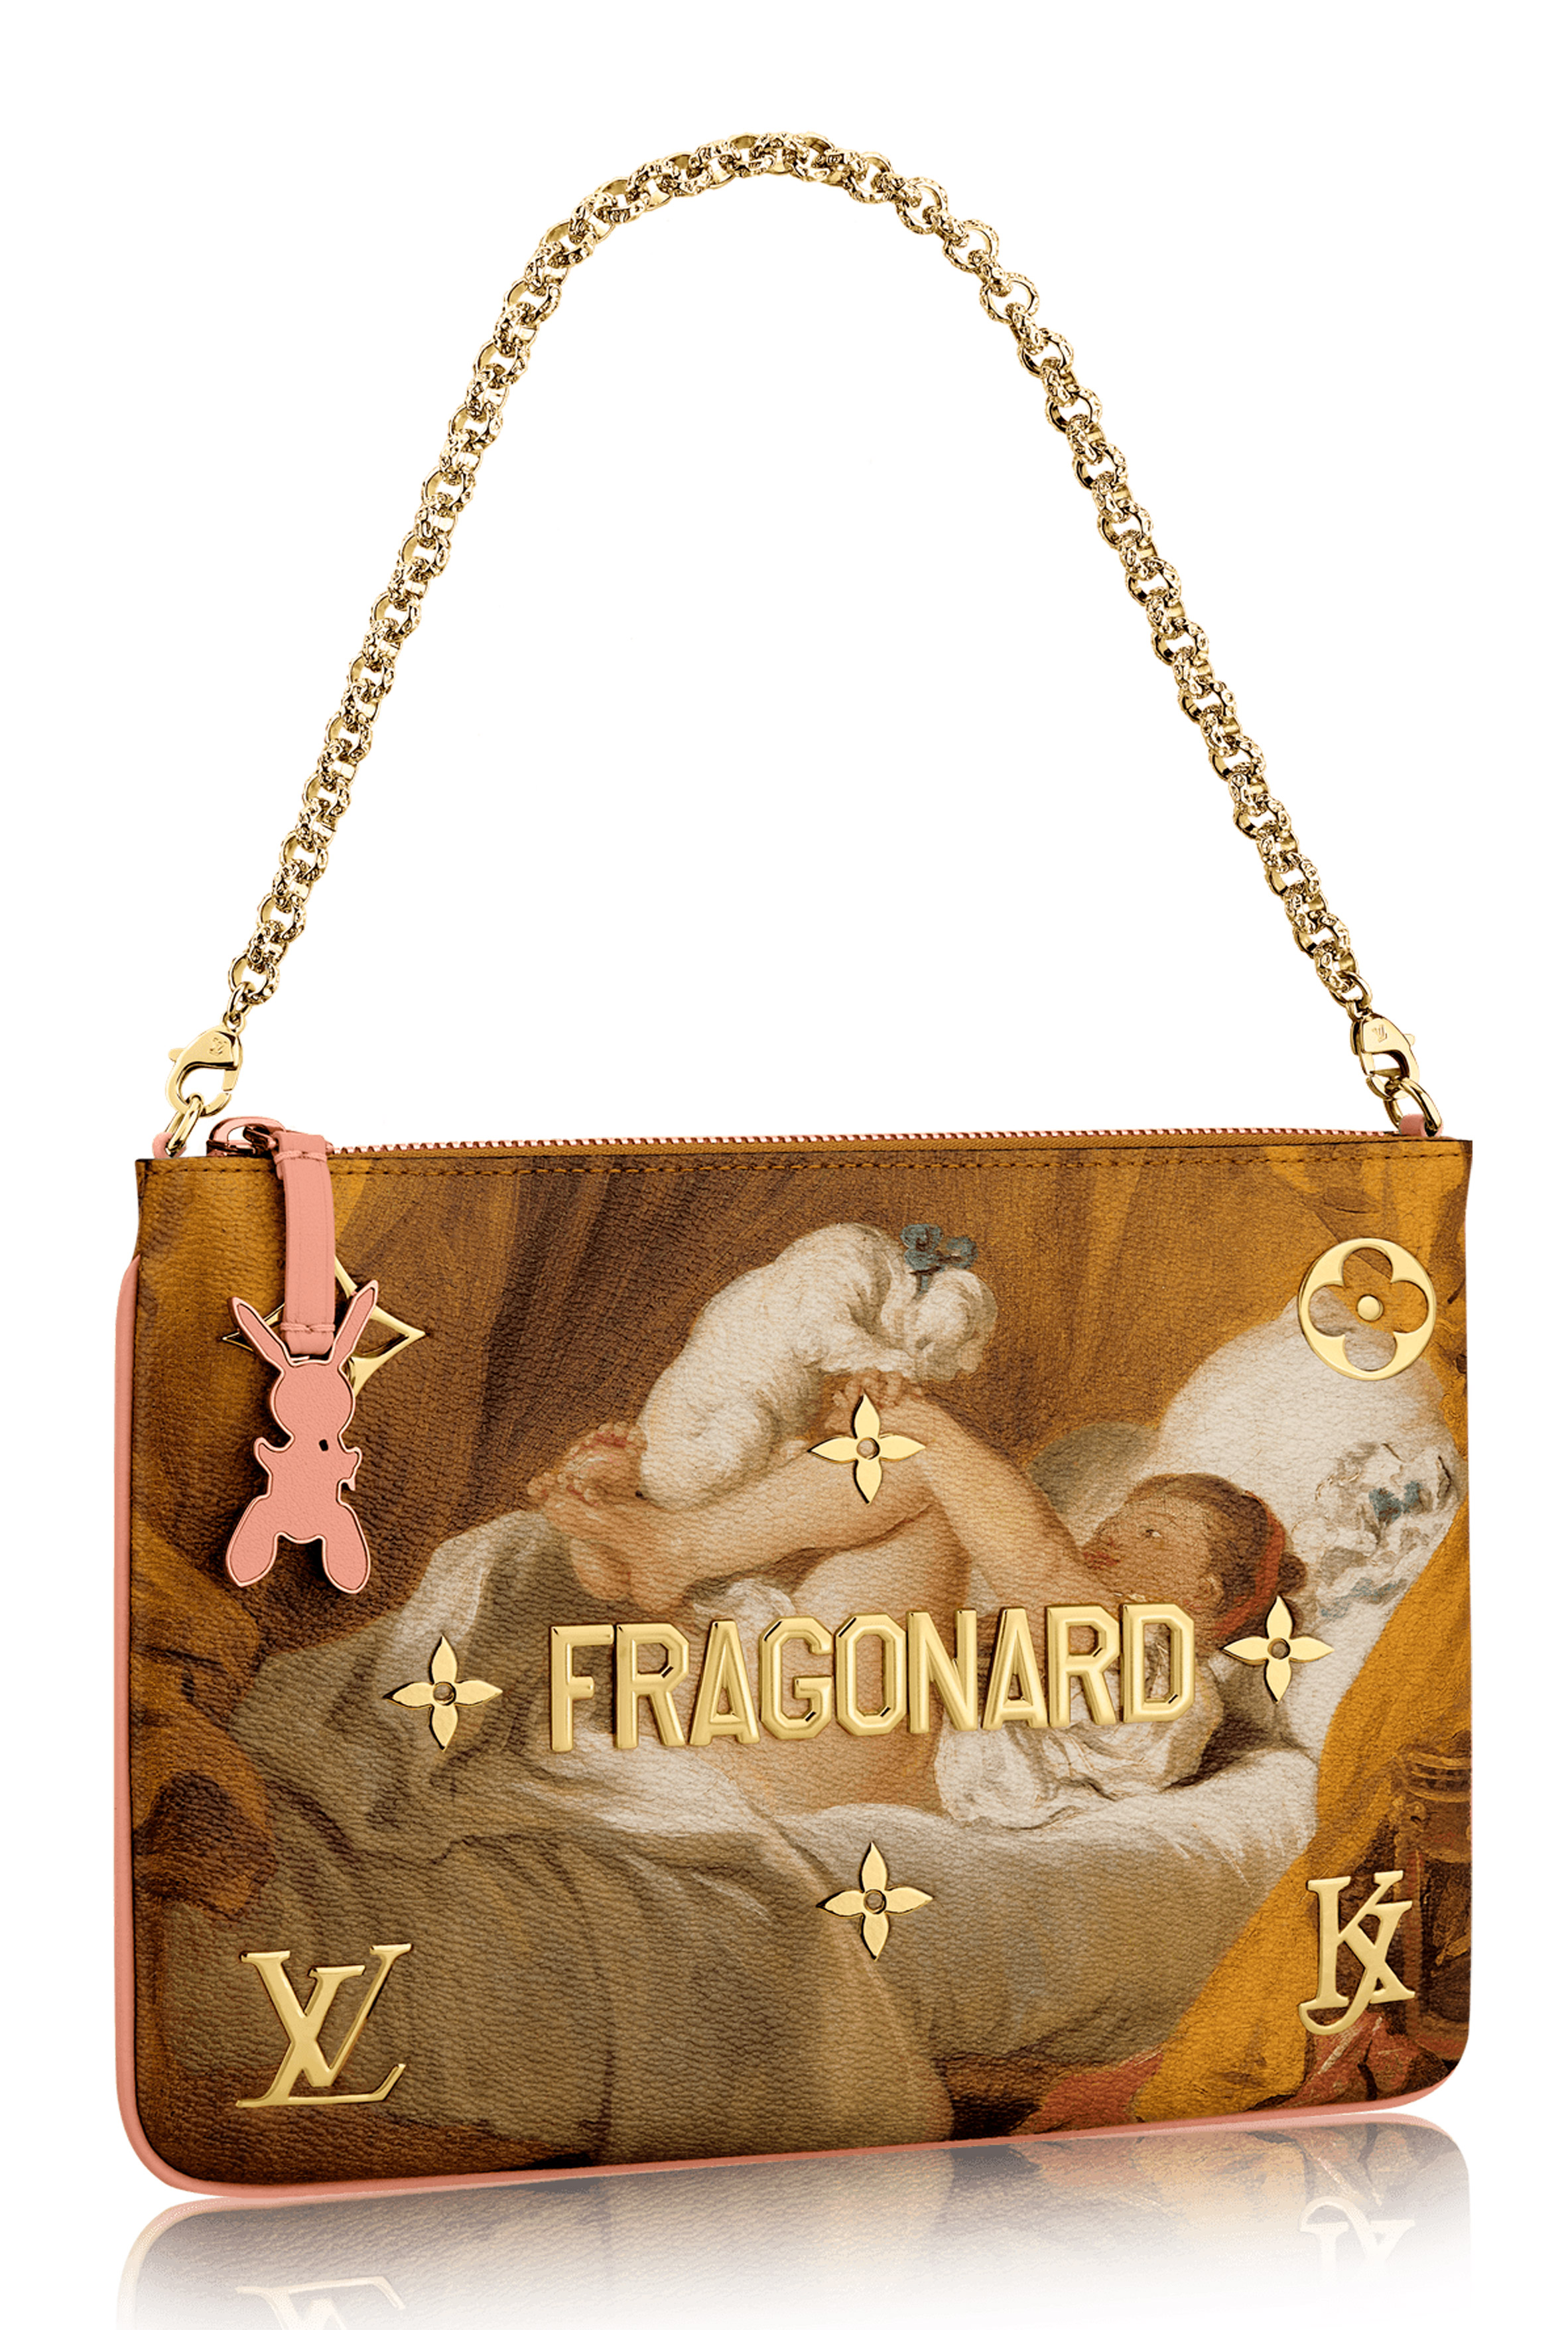 Jeff Koons, Louis Vuitton Da Vinci bag (signed and dated by Jeff Koons)  (2017), Available for Sale